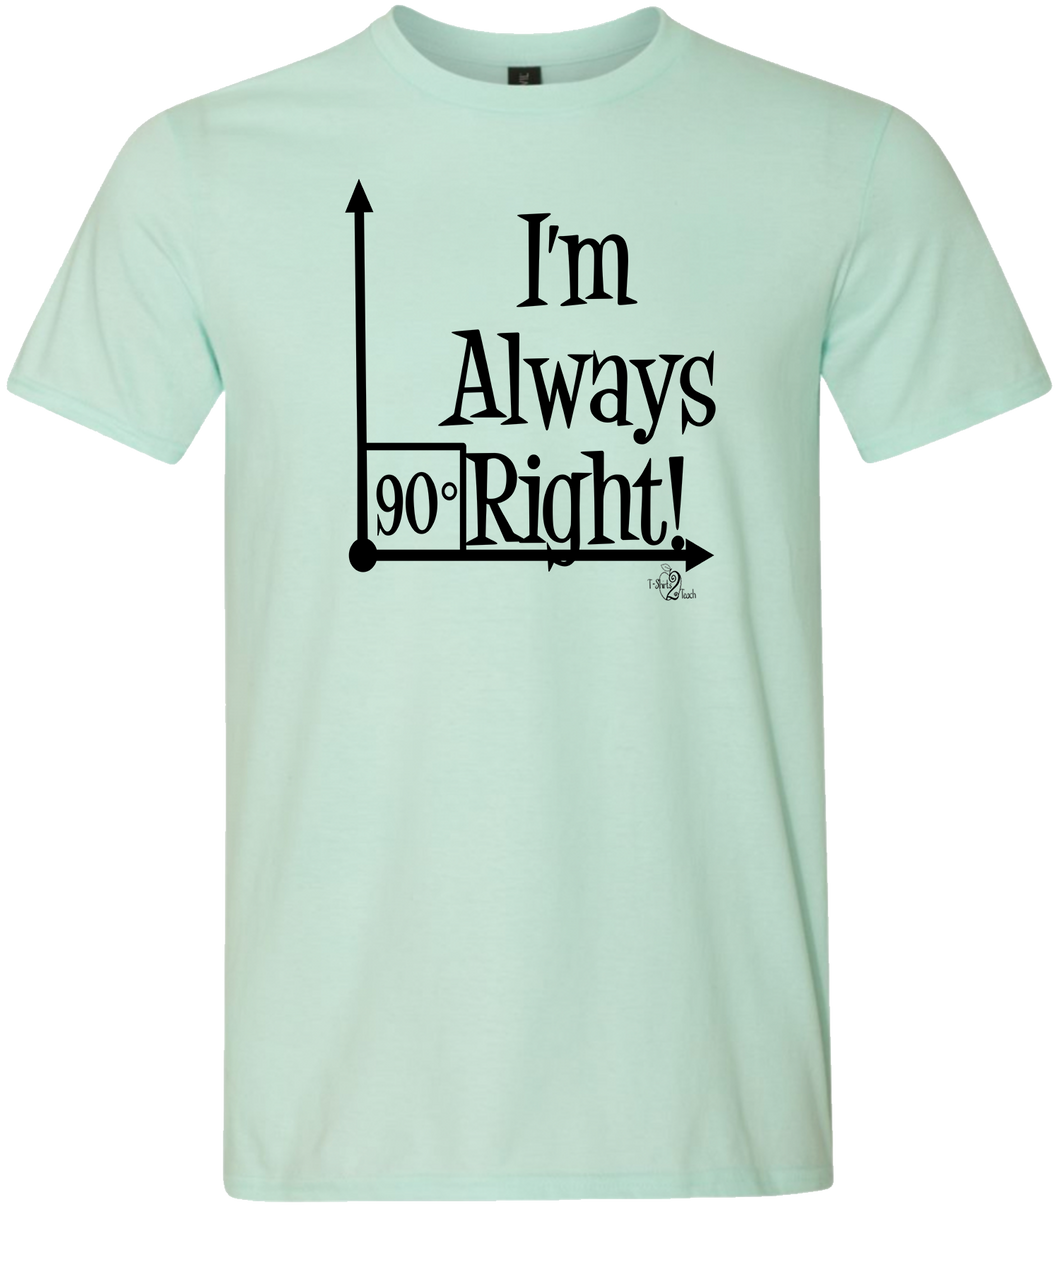 I'm Always Right Tee (ONLY Size Medium, Large, 3X)